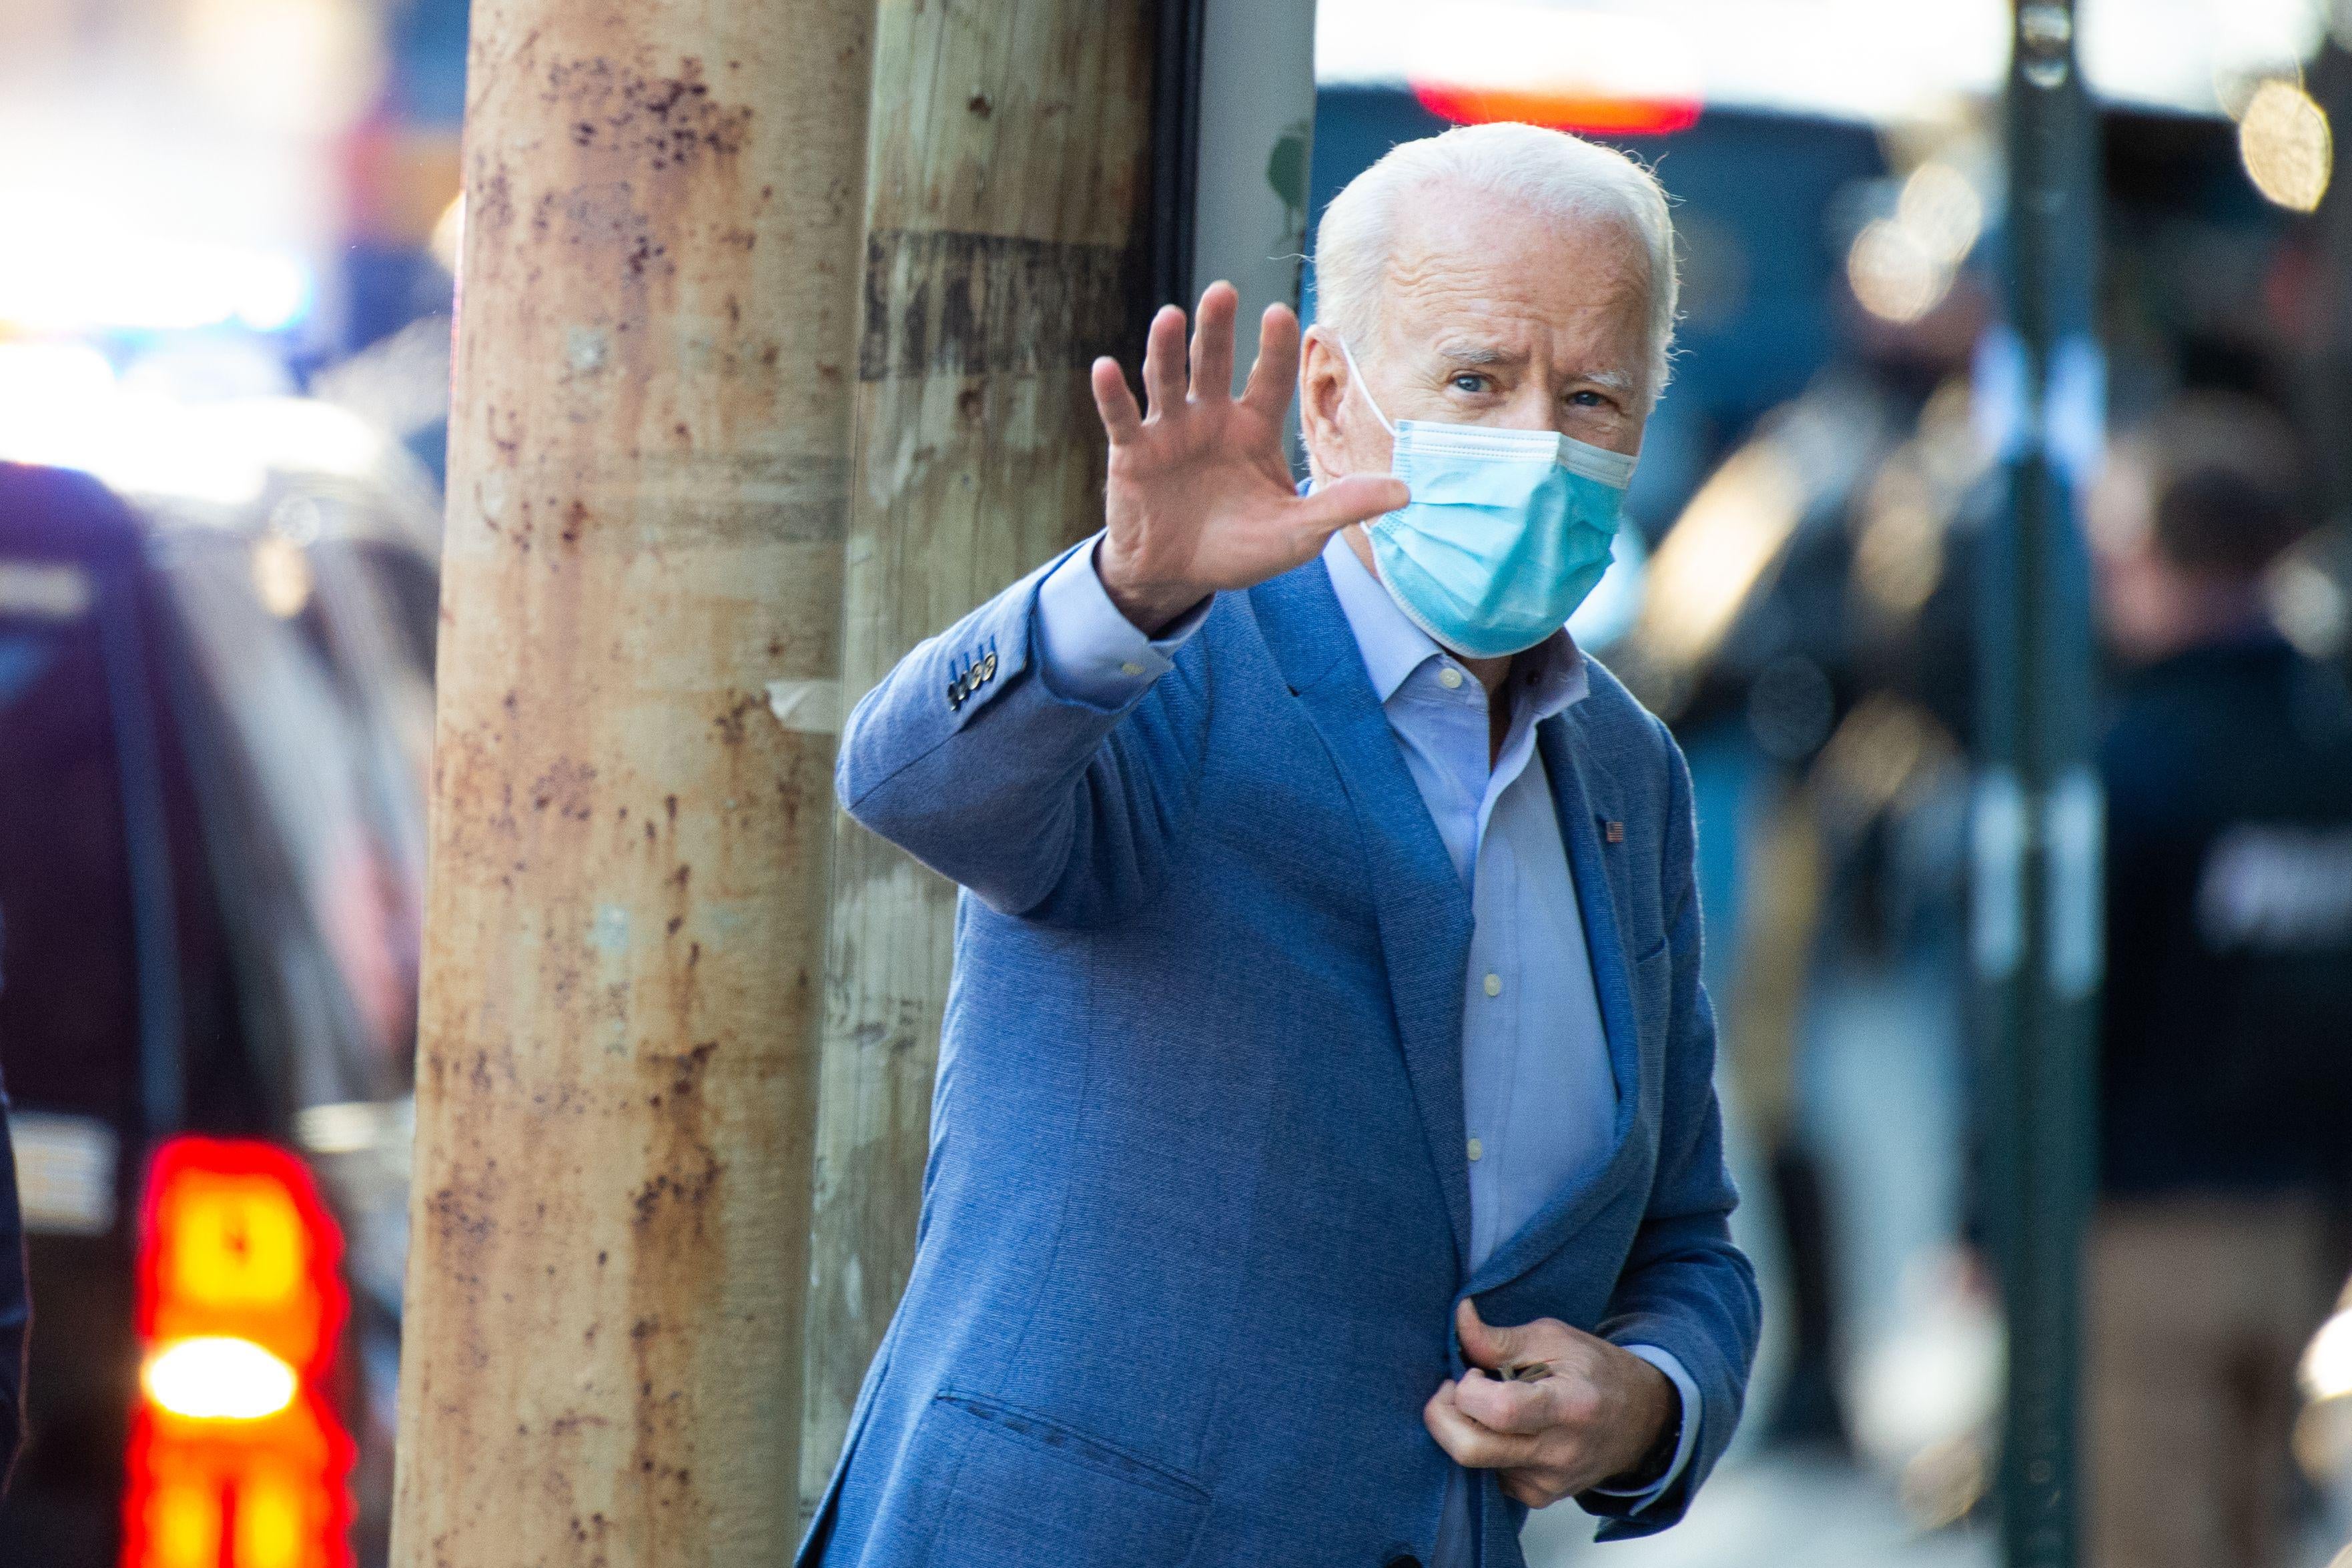 Joe Biden, wearing a medical mask, waves to the camera as he walks into a venue in Wilmington, Delaware